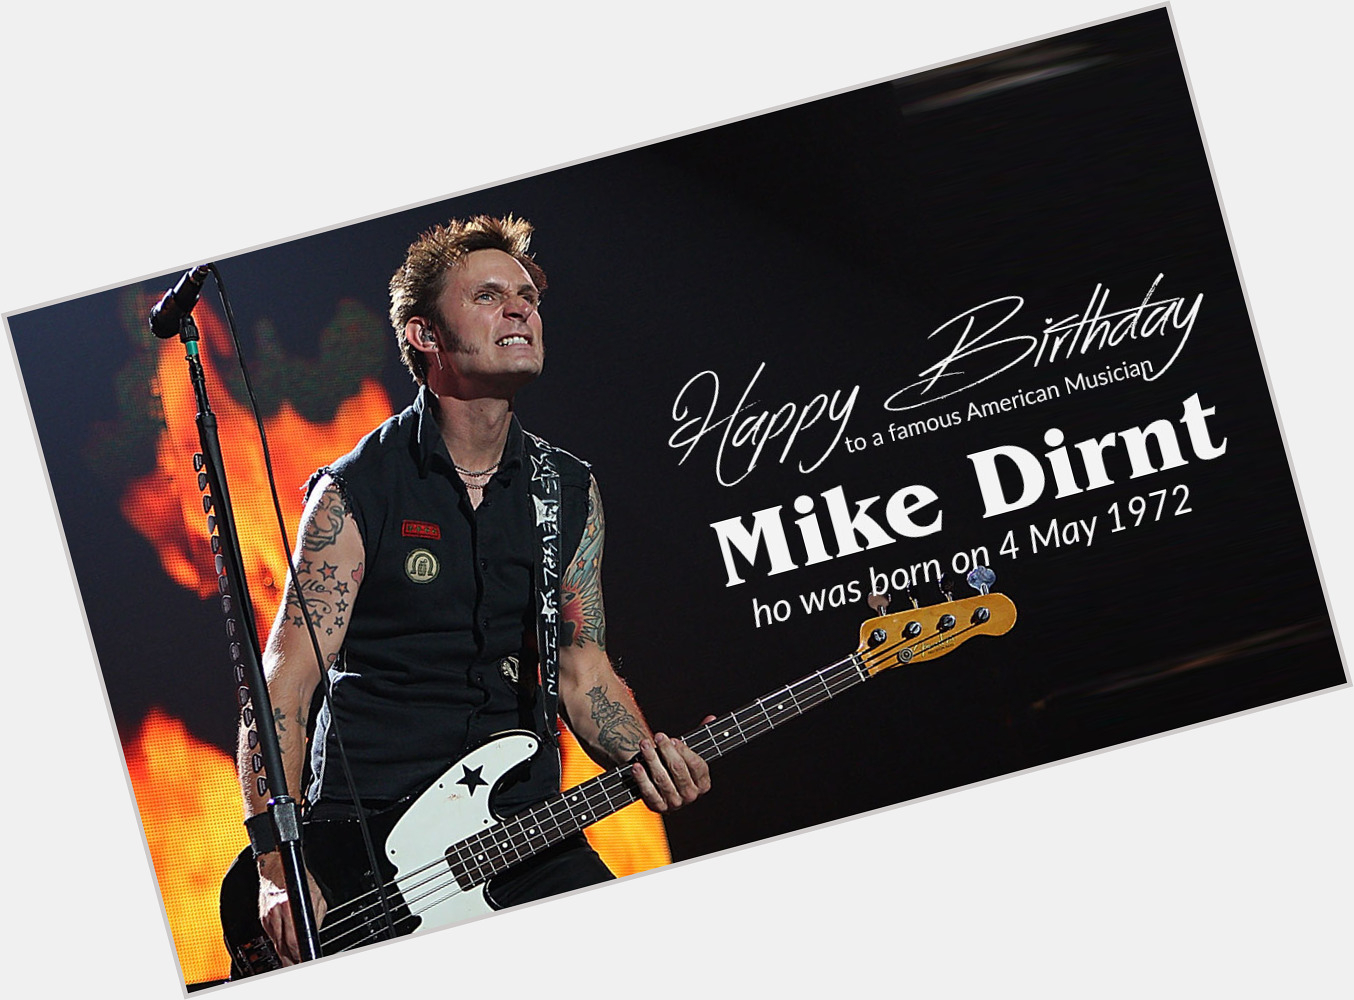 Happy Birthday to a famous American Musician Mike Dirnt who was born on 4 May 1972. 